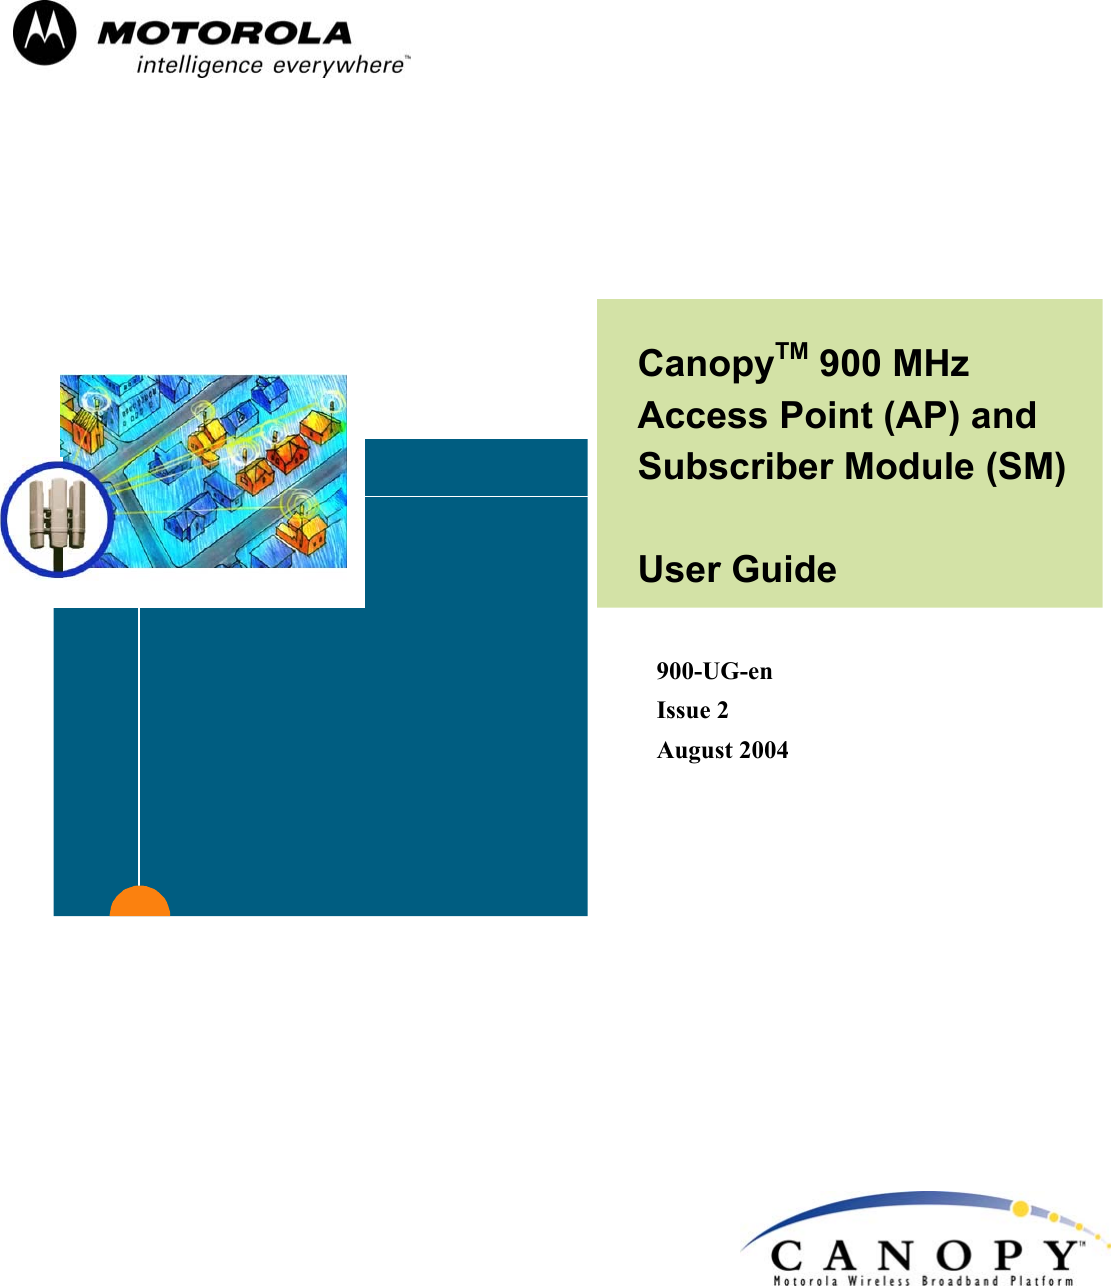 900-UG-enIssue 2August 2004CanopyTM 900 MHzAccess Point (AP) andSubscriber Module (SM)User GuideSoftware Release Notes